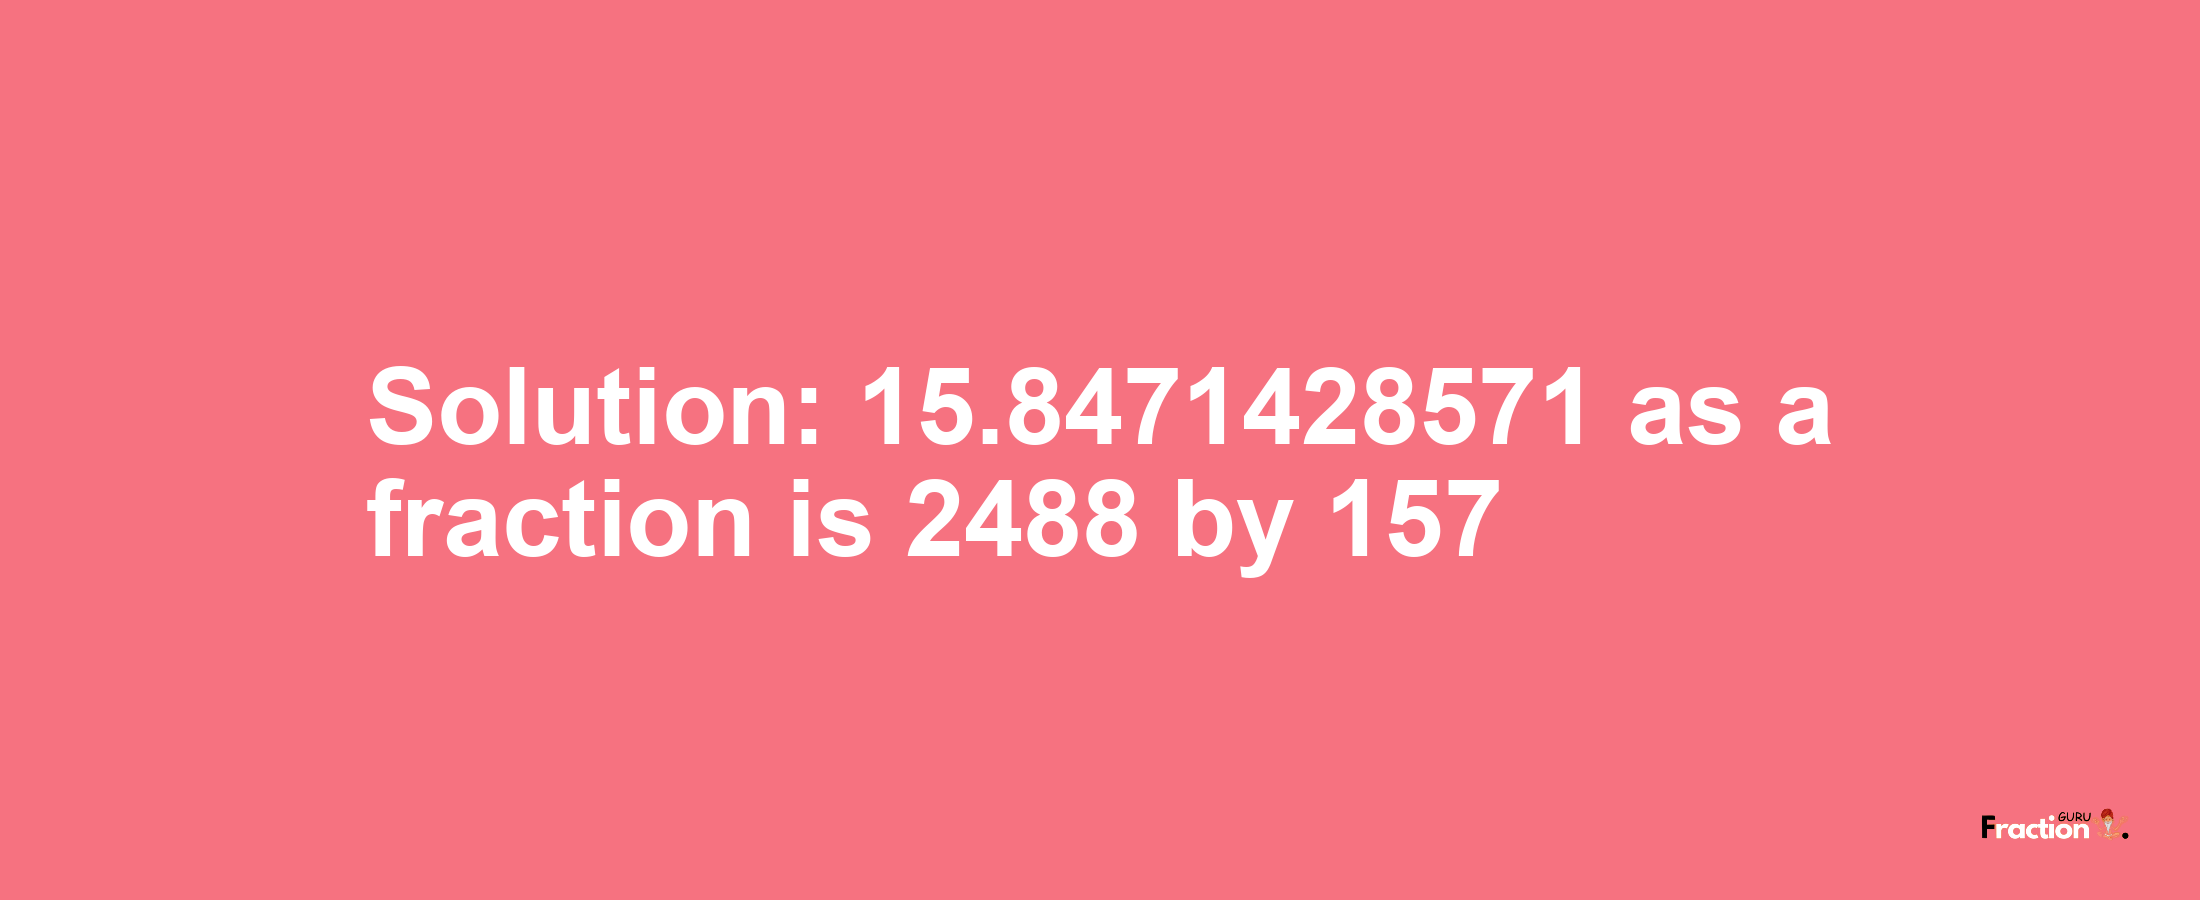 Solution:15.8471428571 as a fraction is 2488/157